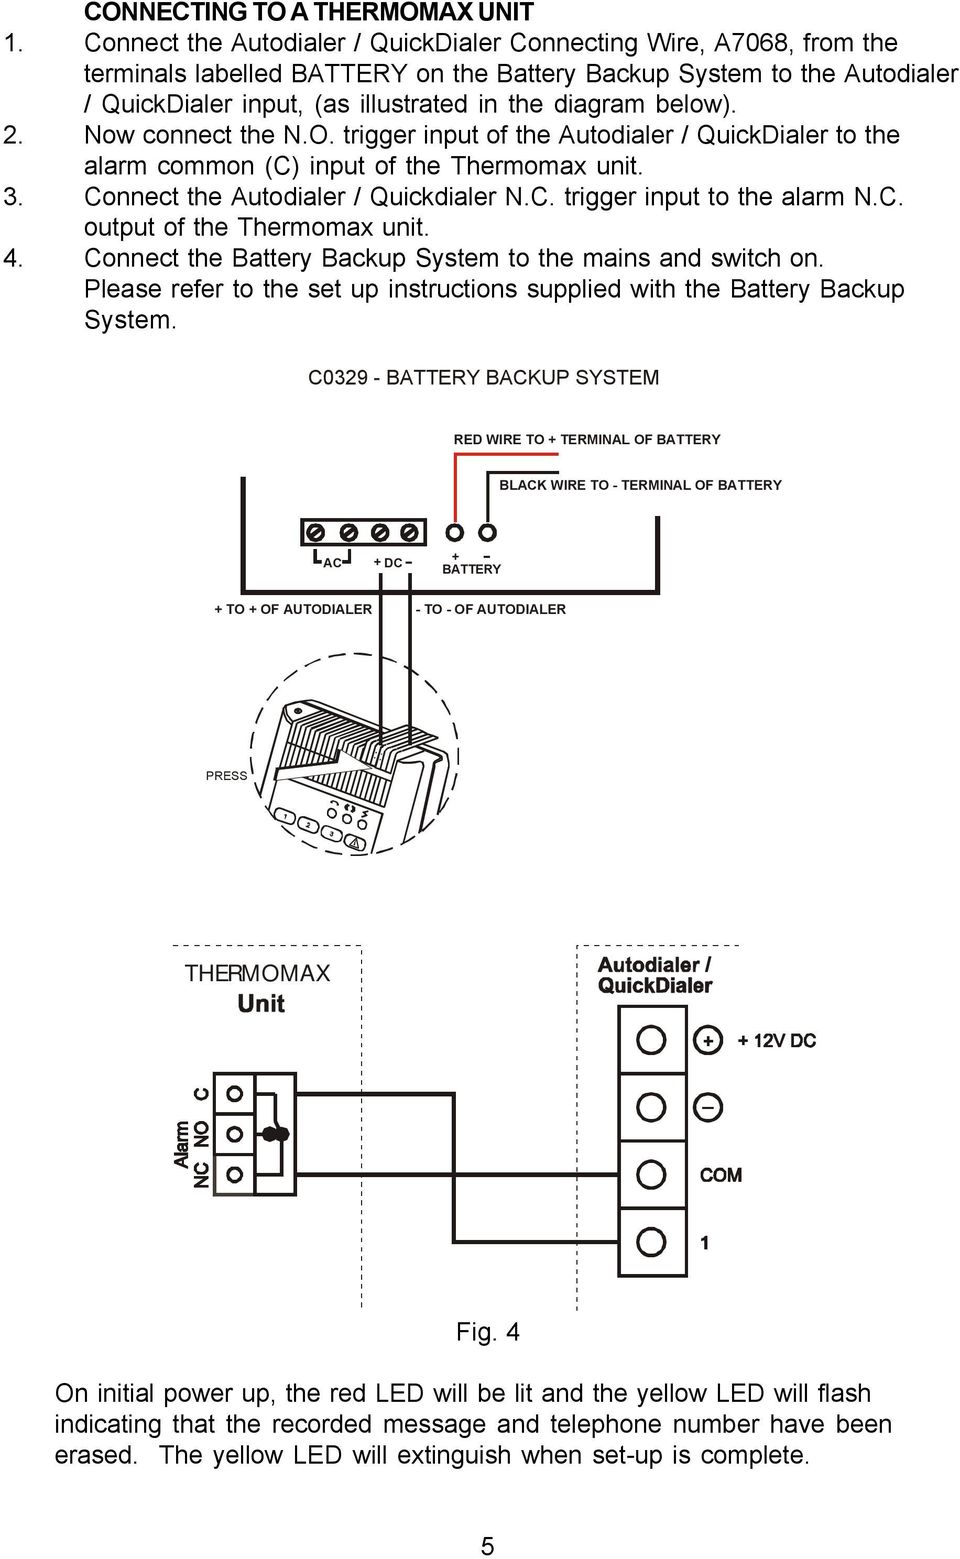 below). 2. Now connect the N.O. trigger input of the Autodialer / QuickDialer to the alarm common (C) input of the Thermomax unit. 3. Connect the Autodialer / Quickdialer N.C. trigger input to the alarm N.